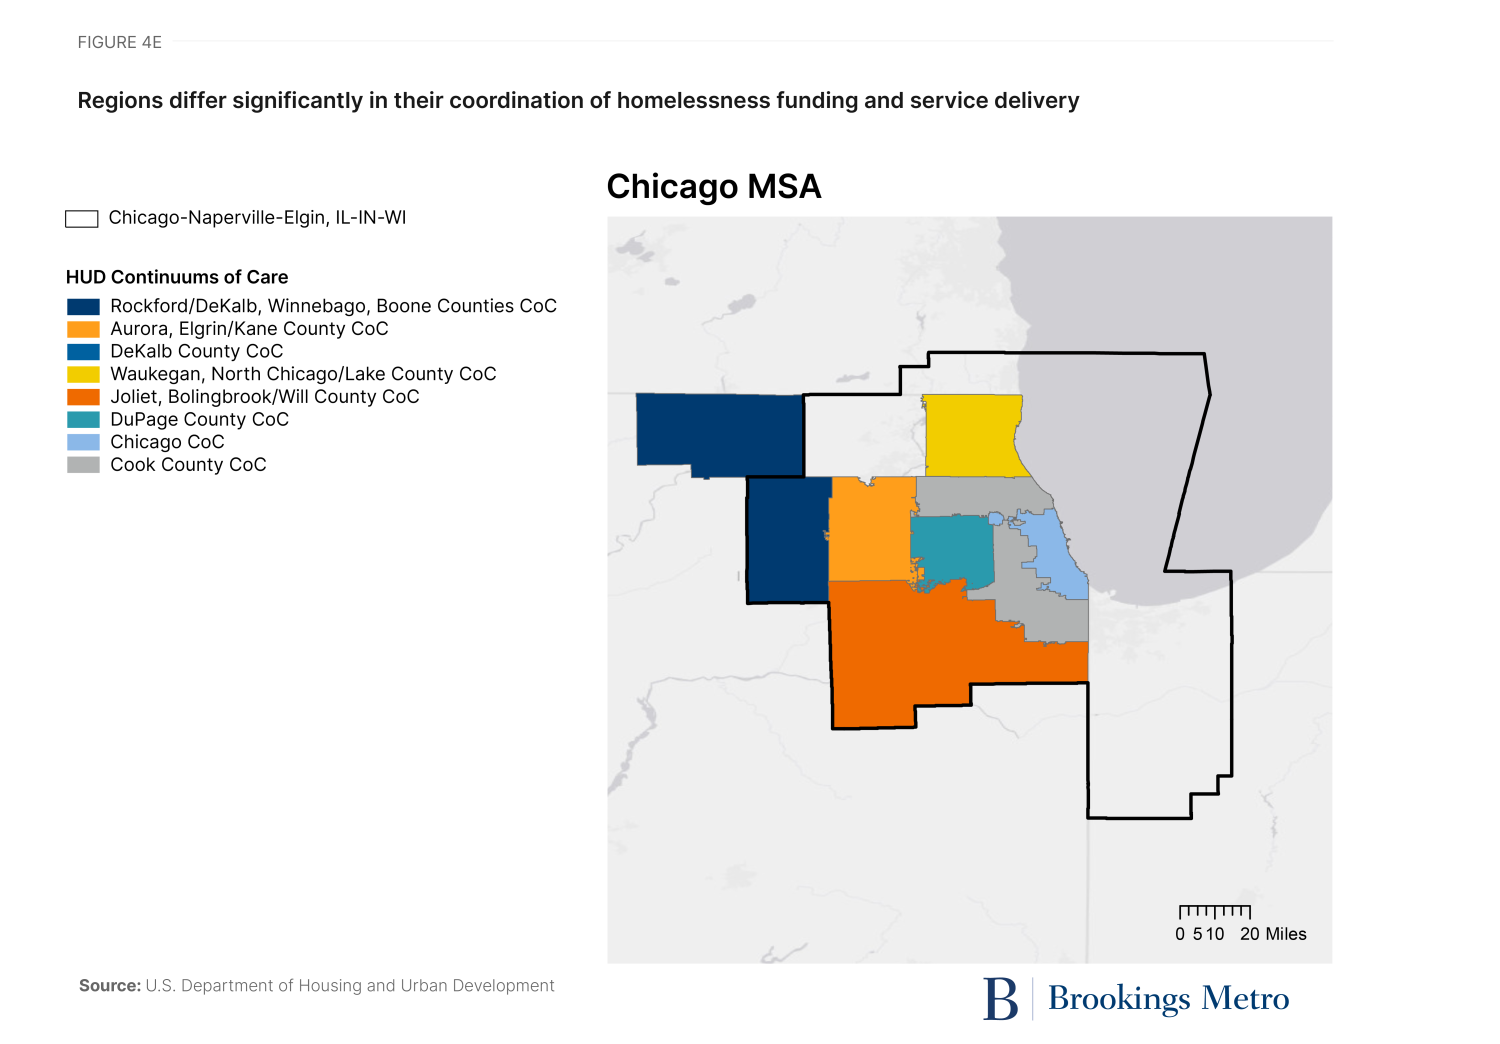 Figure 4. Regions differ significantly in their coordination of homelessness funding and service delivery - Chicago